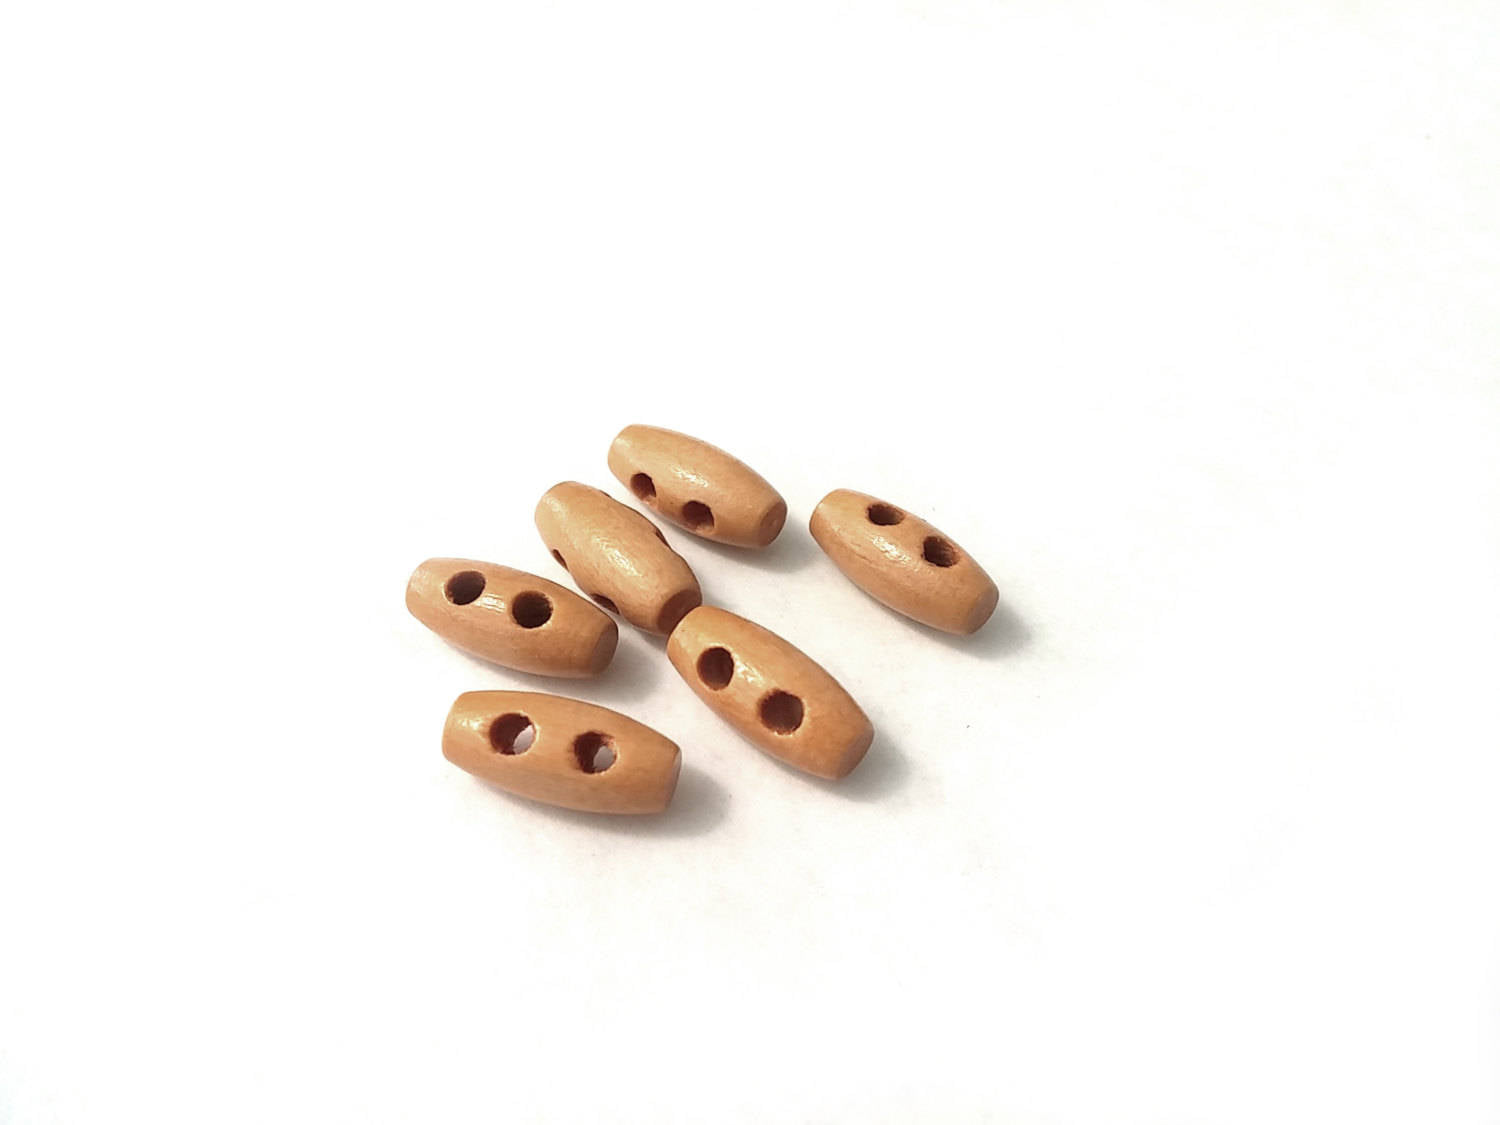 6 tiny wooden Toggle Buttons 15mm - Gold, brown, black or white